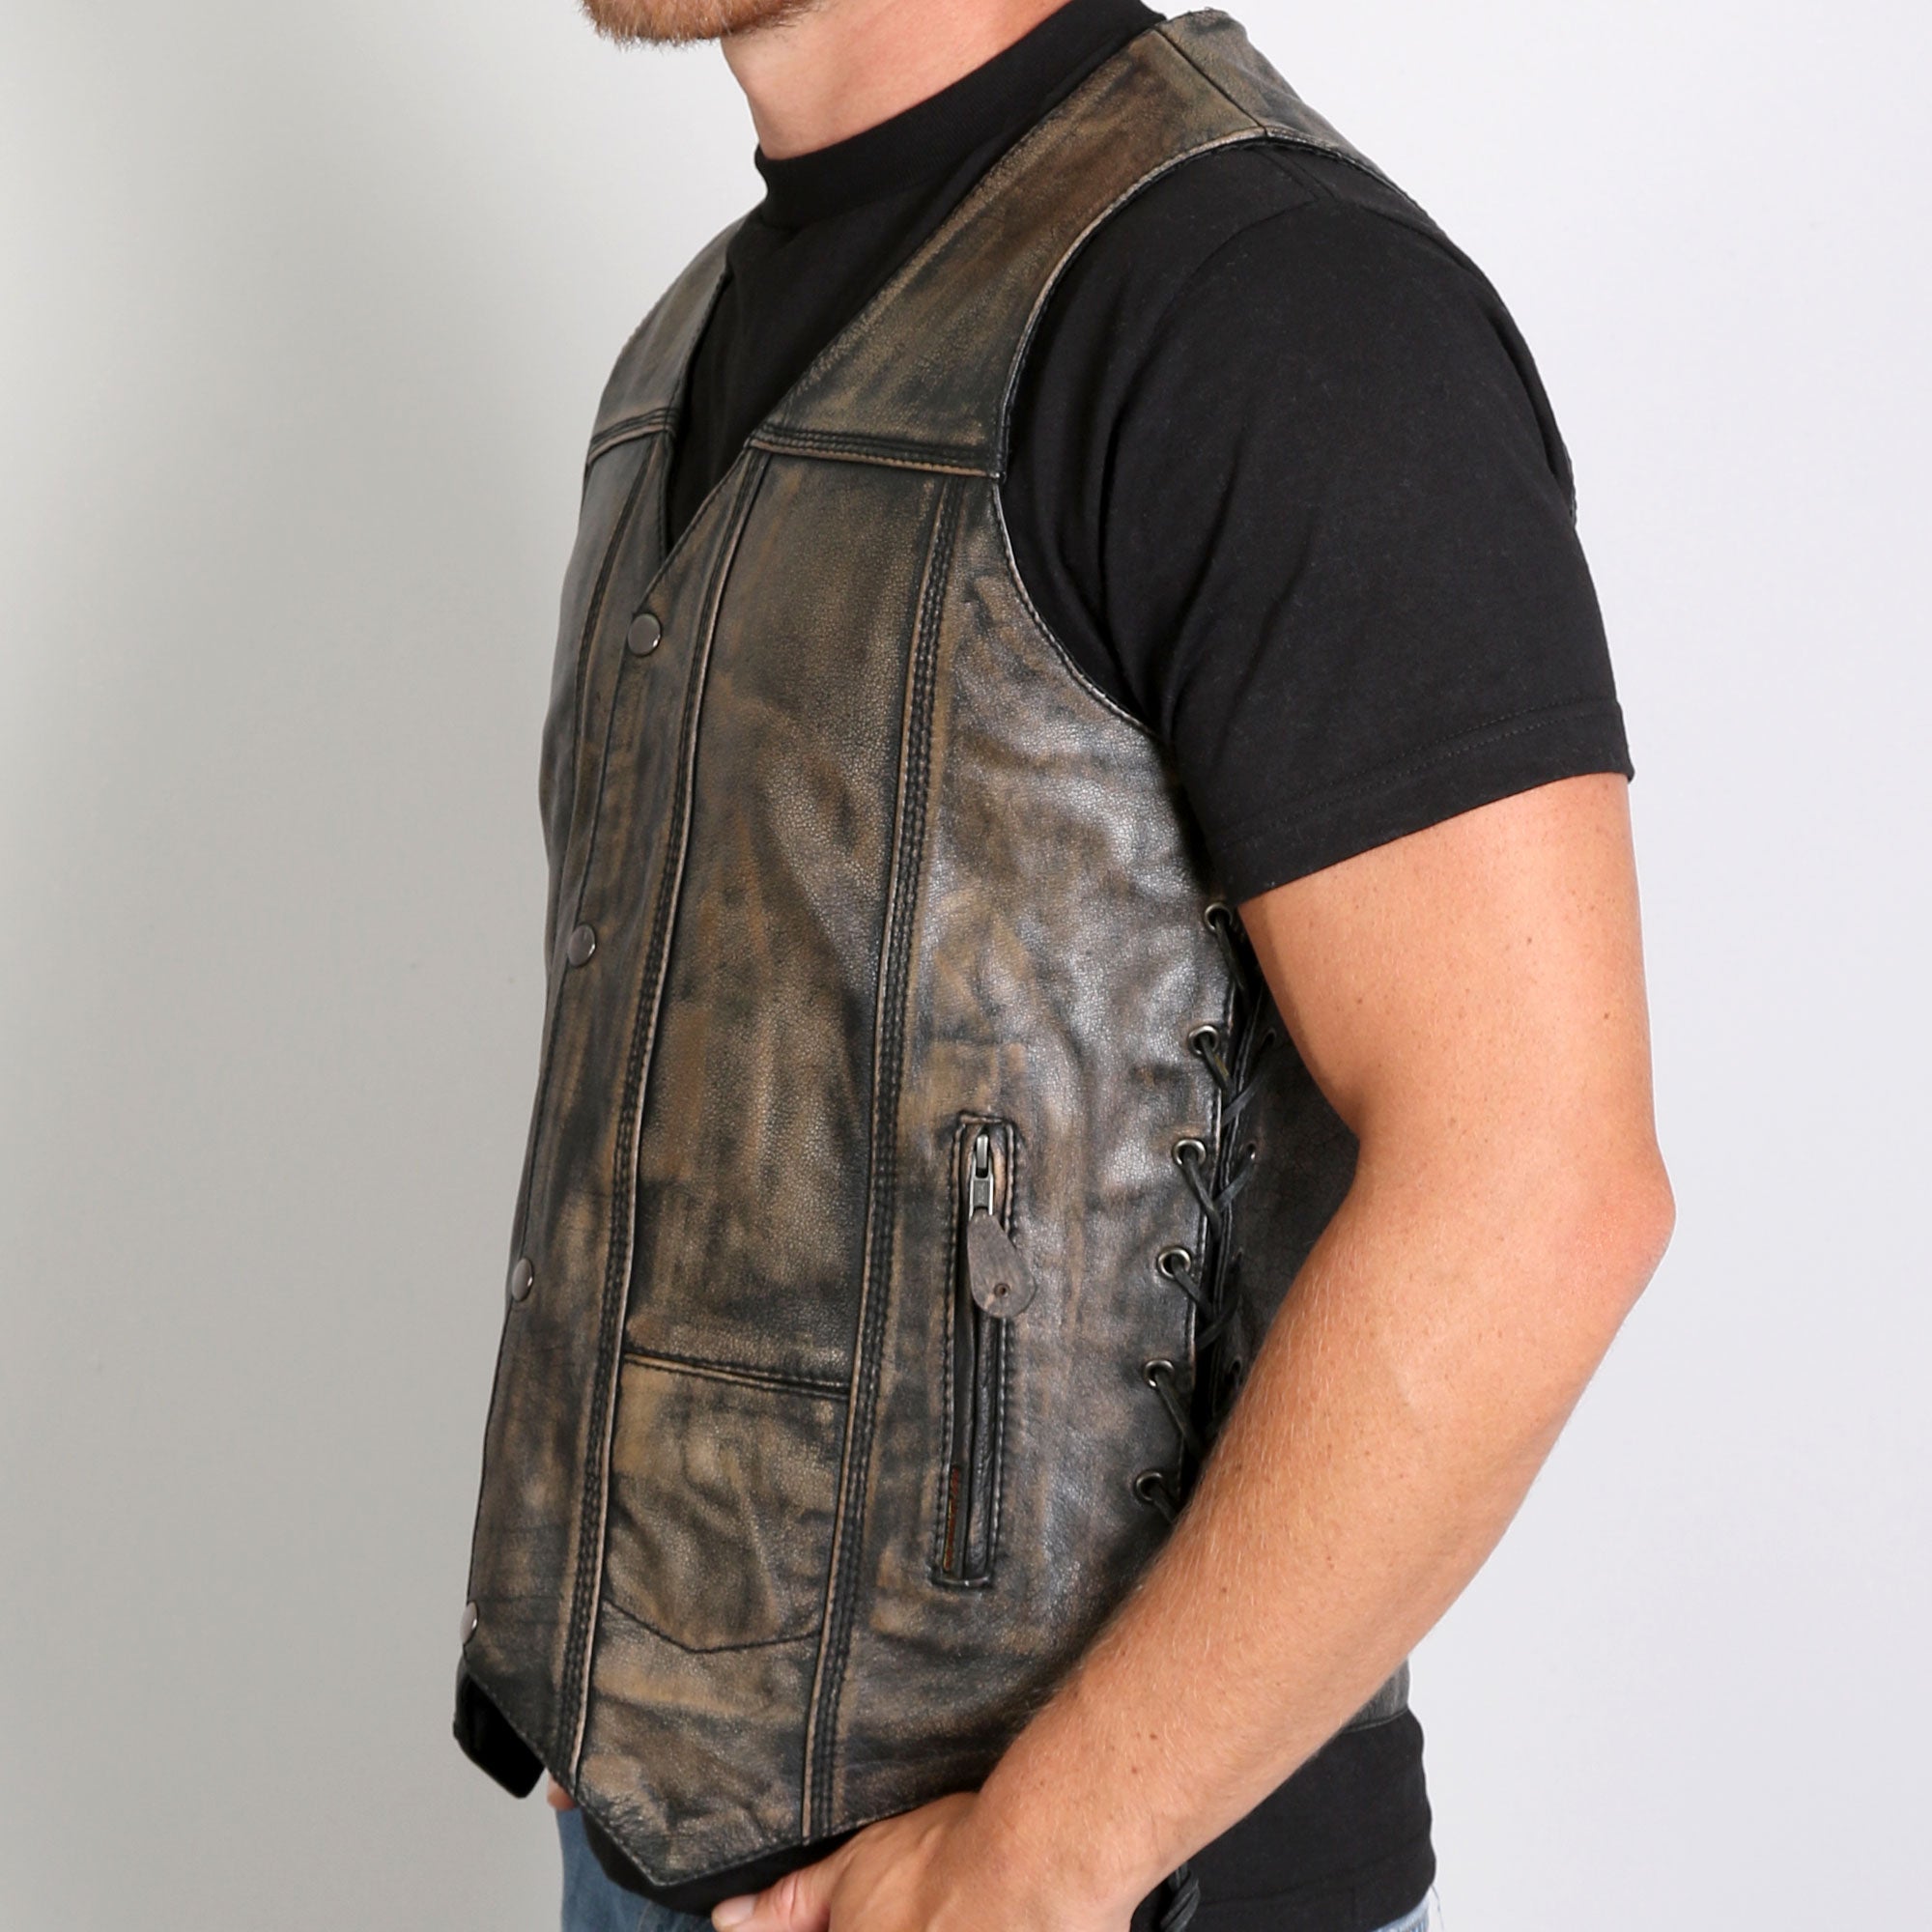 Hot Leathers Men's Distressed Brown Leather Vest